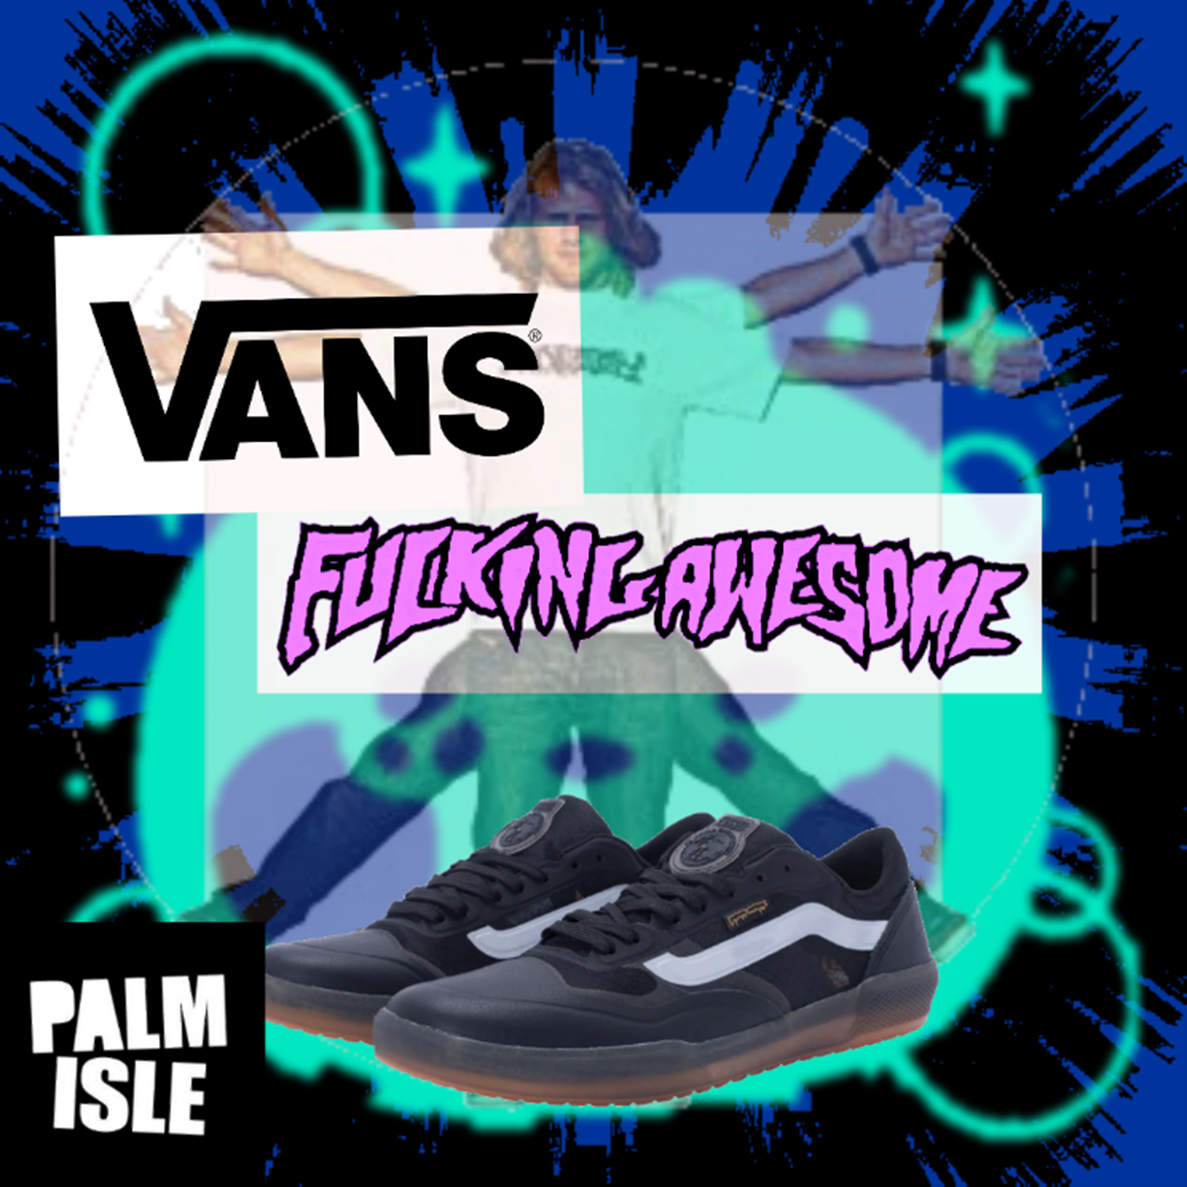 Vans and Fucking Awesome Team Up For AVE Pro - Palm Isle Skate Shop